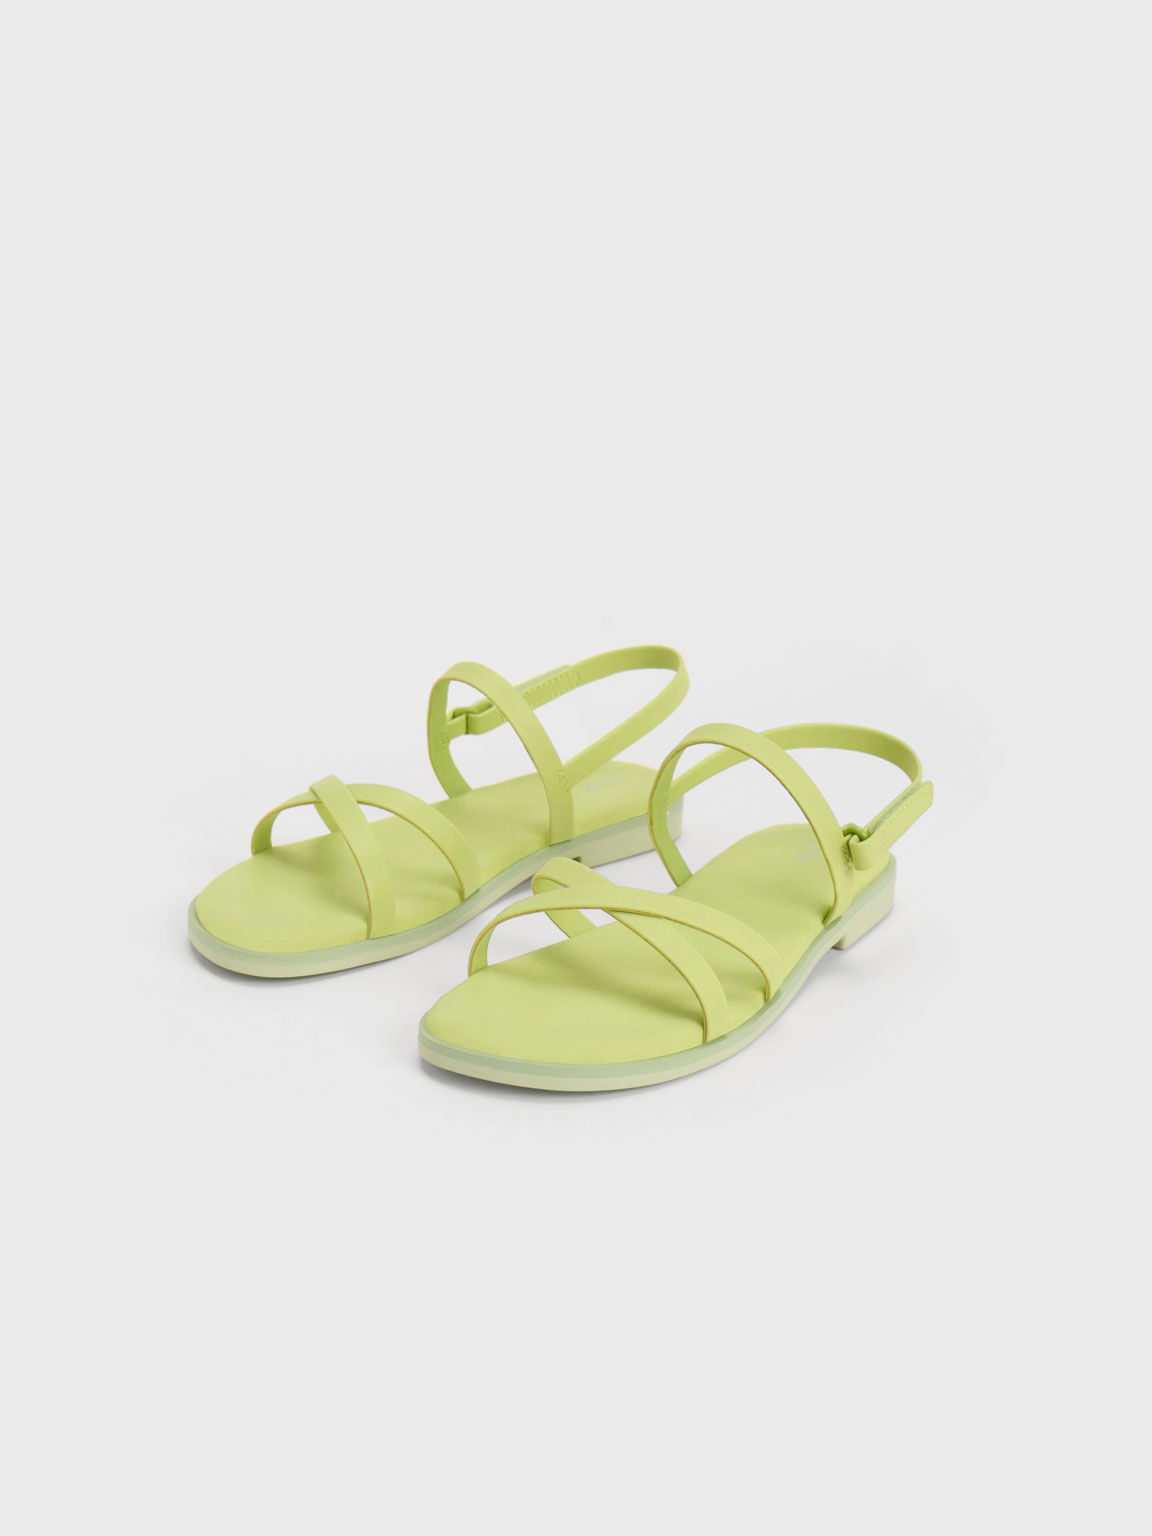 Green And Yellow Sandals Cheap Sale | bellvalefarms.com